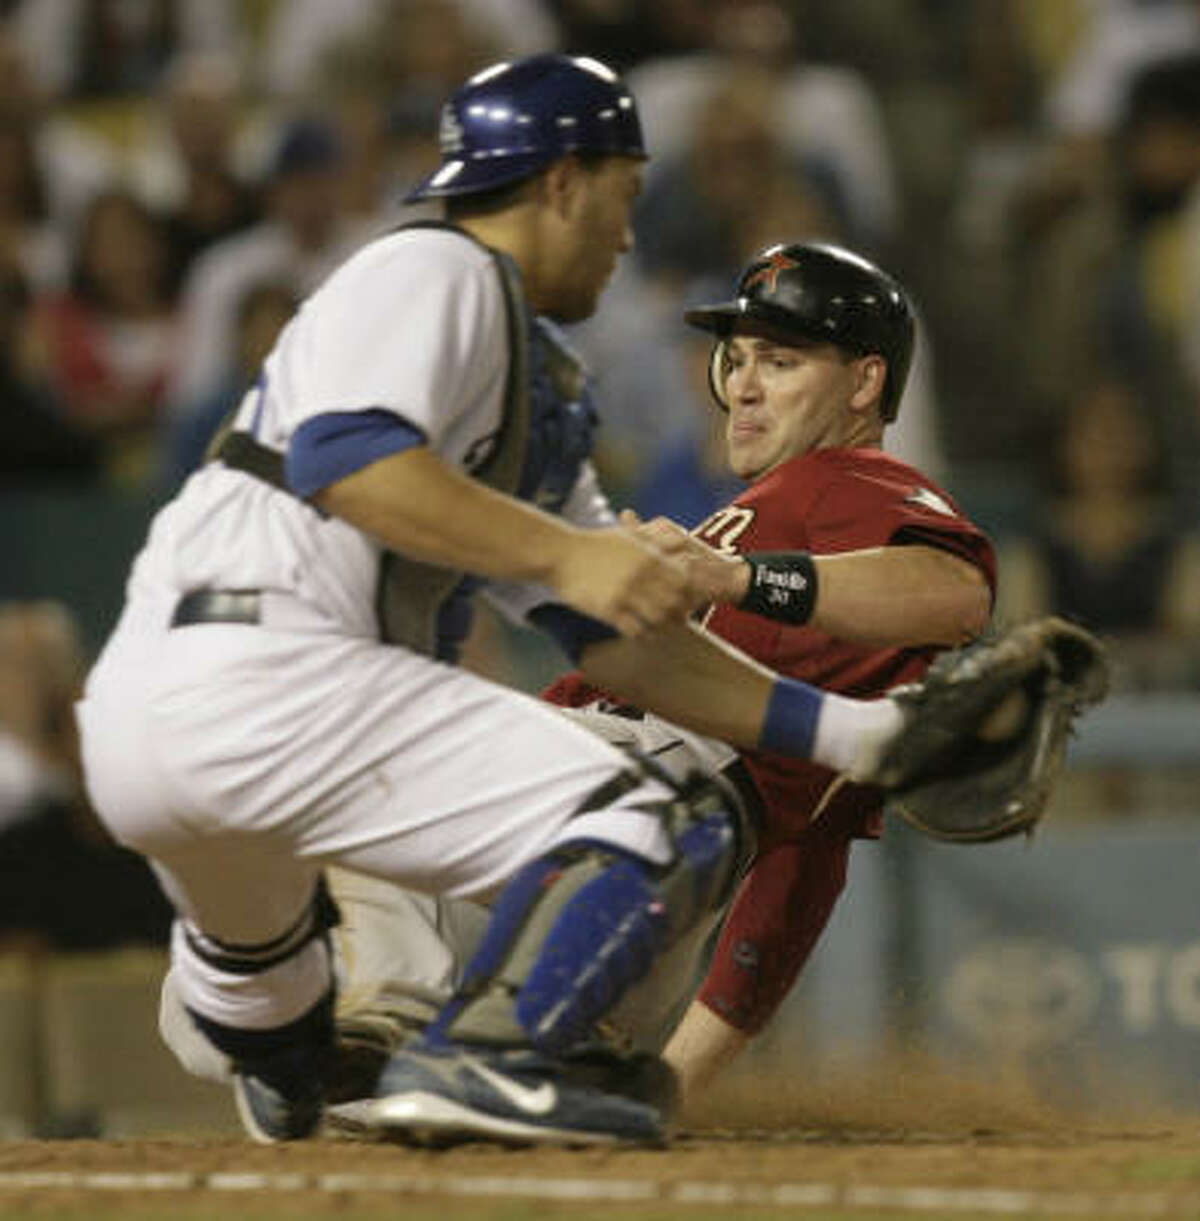 Right fielder Luke Scott slides under the tag at home by Dodgers catcher Russell Martin in the sixth inning.